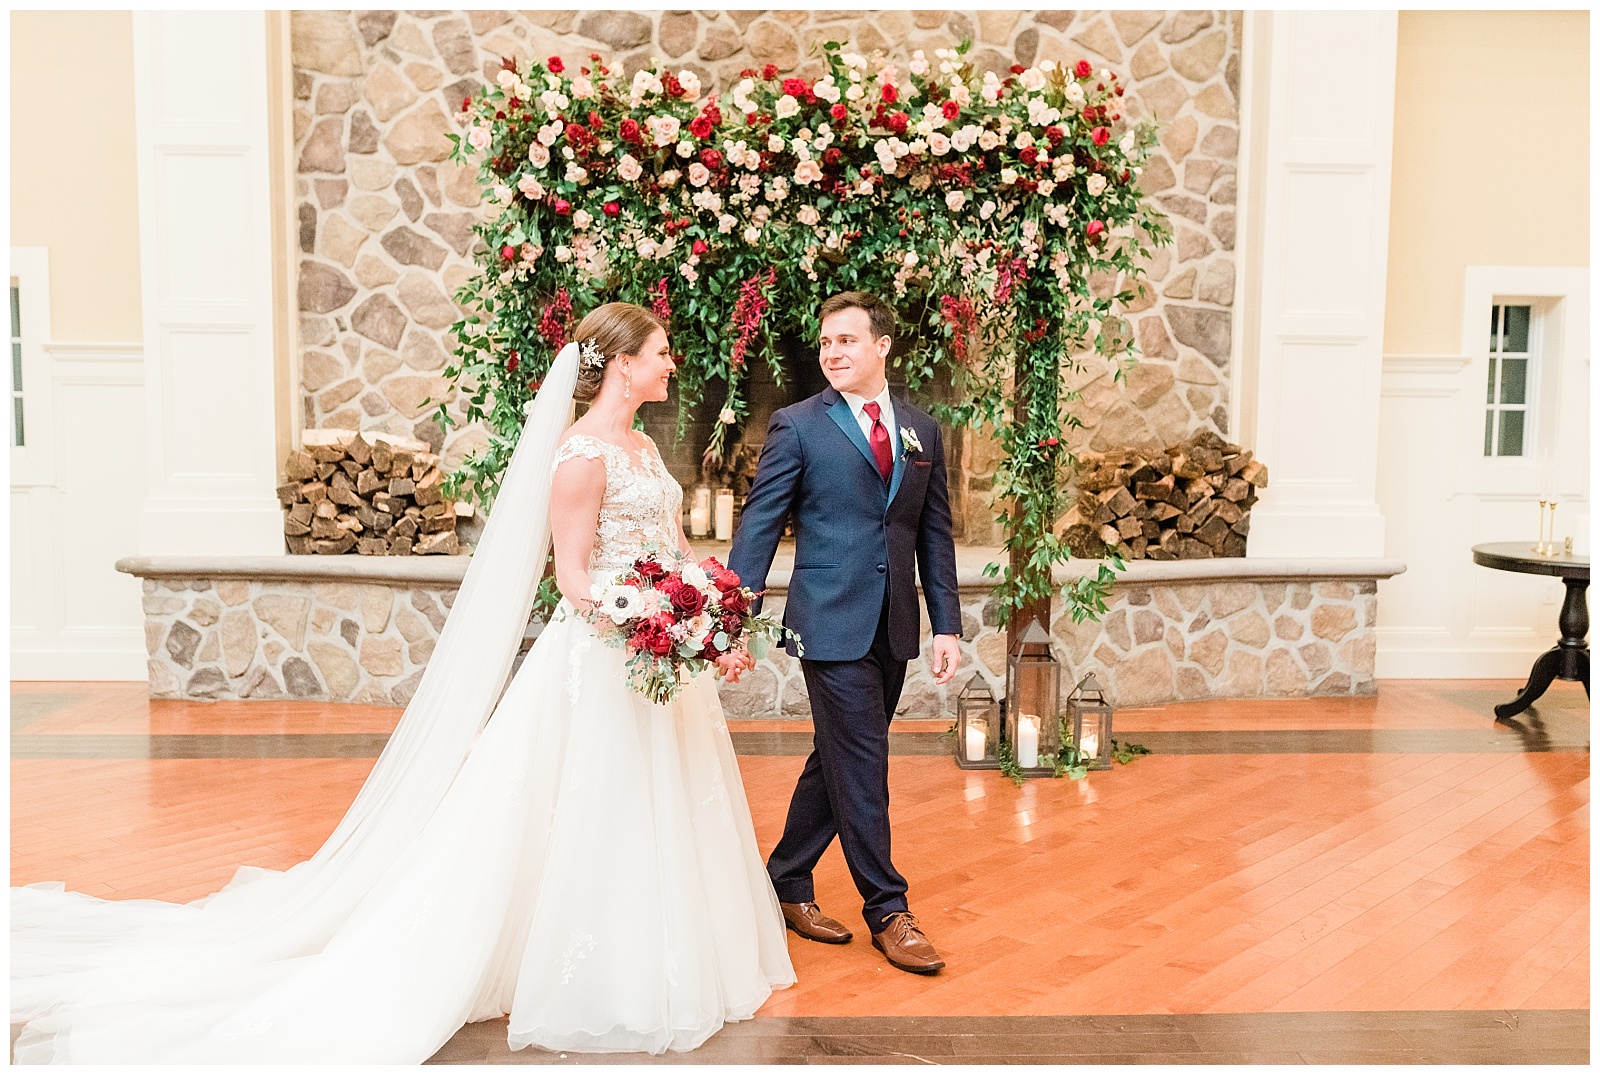 Bride & Groom Portraits,Floral,NJ,New Jersey,The Ryland Inn,Twisted Willow,Wedding,Wedding Photographer,Winter,